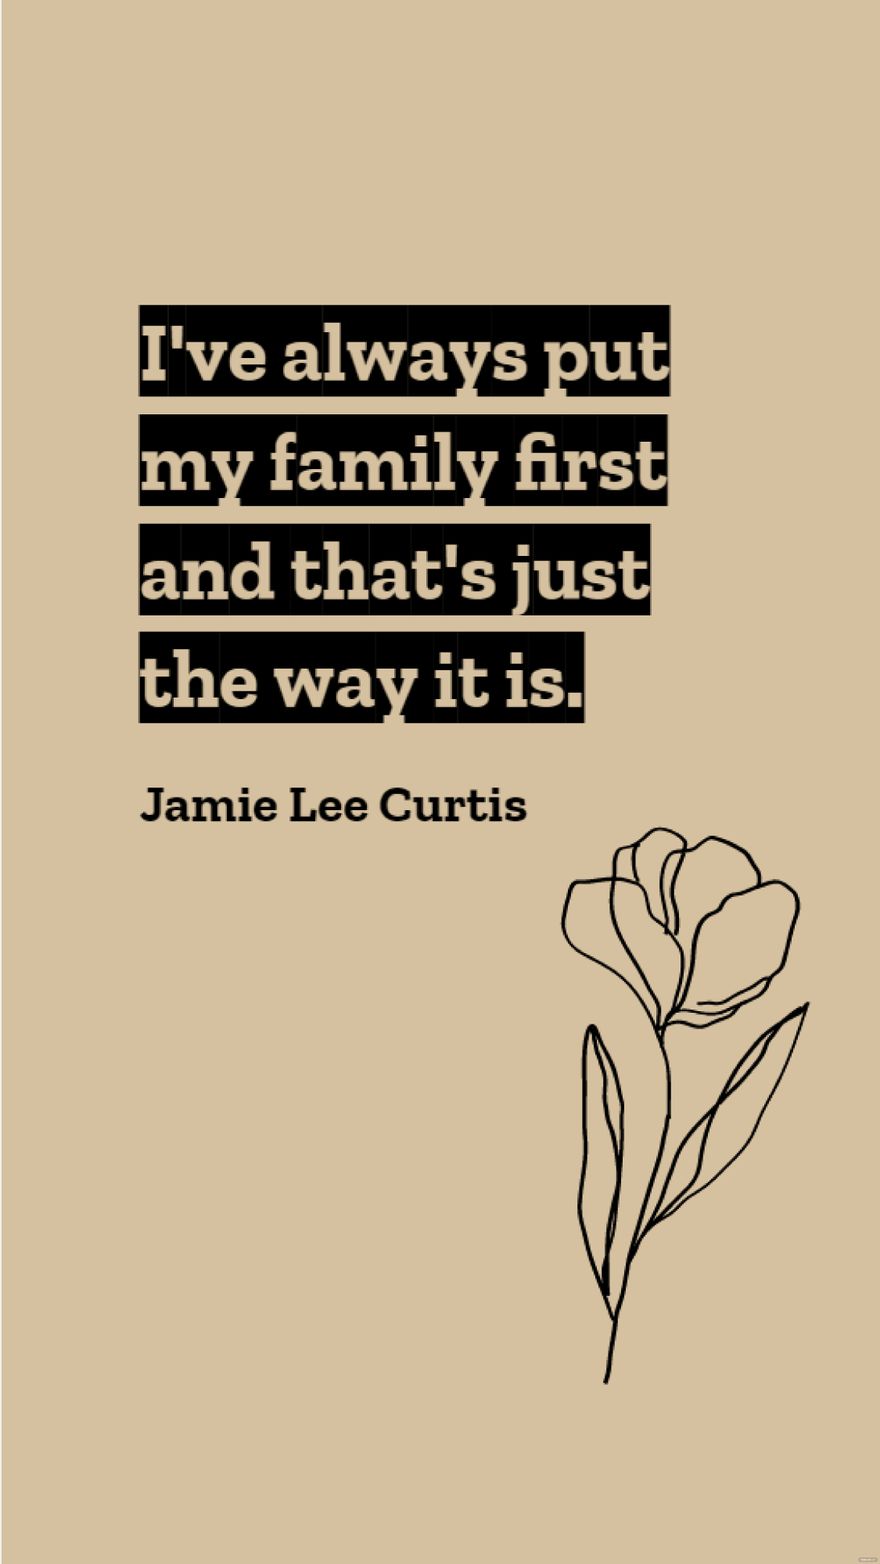 Jamie Lee Curtis - I've always put my family first and that's just the way it is. Template